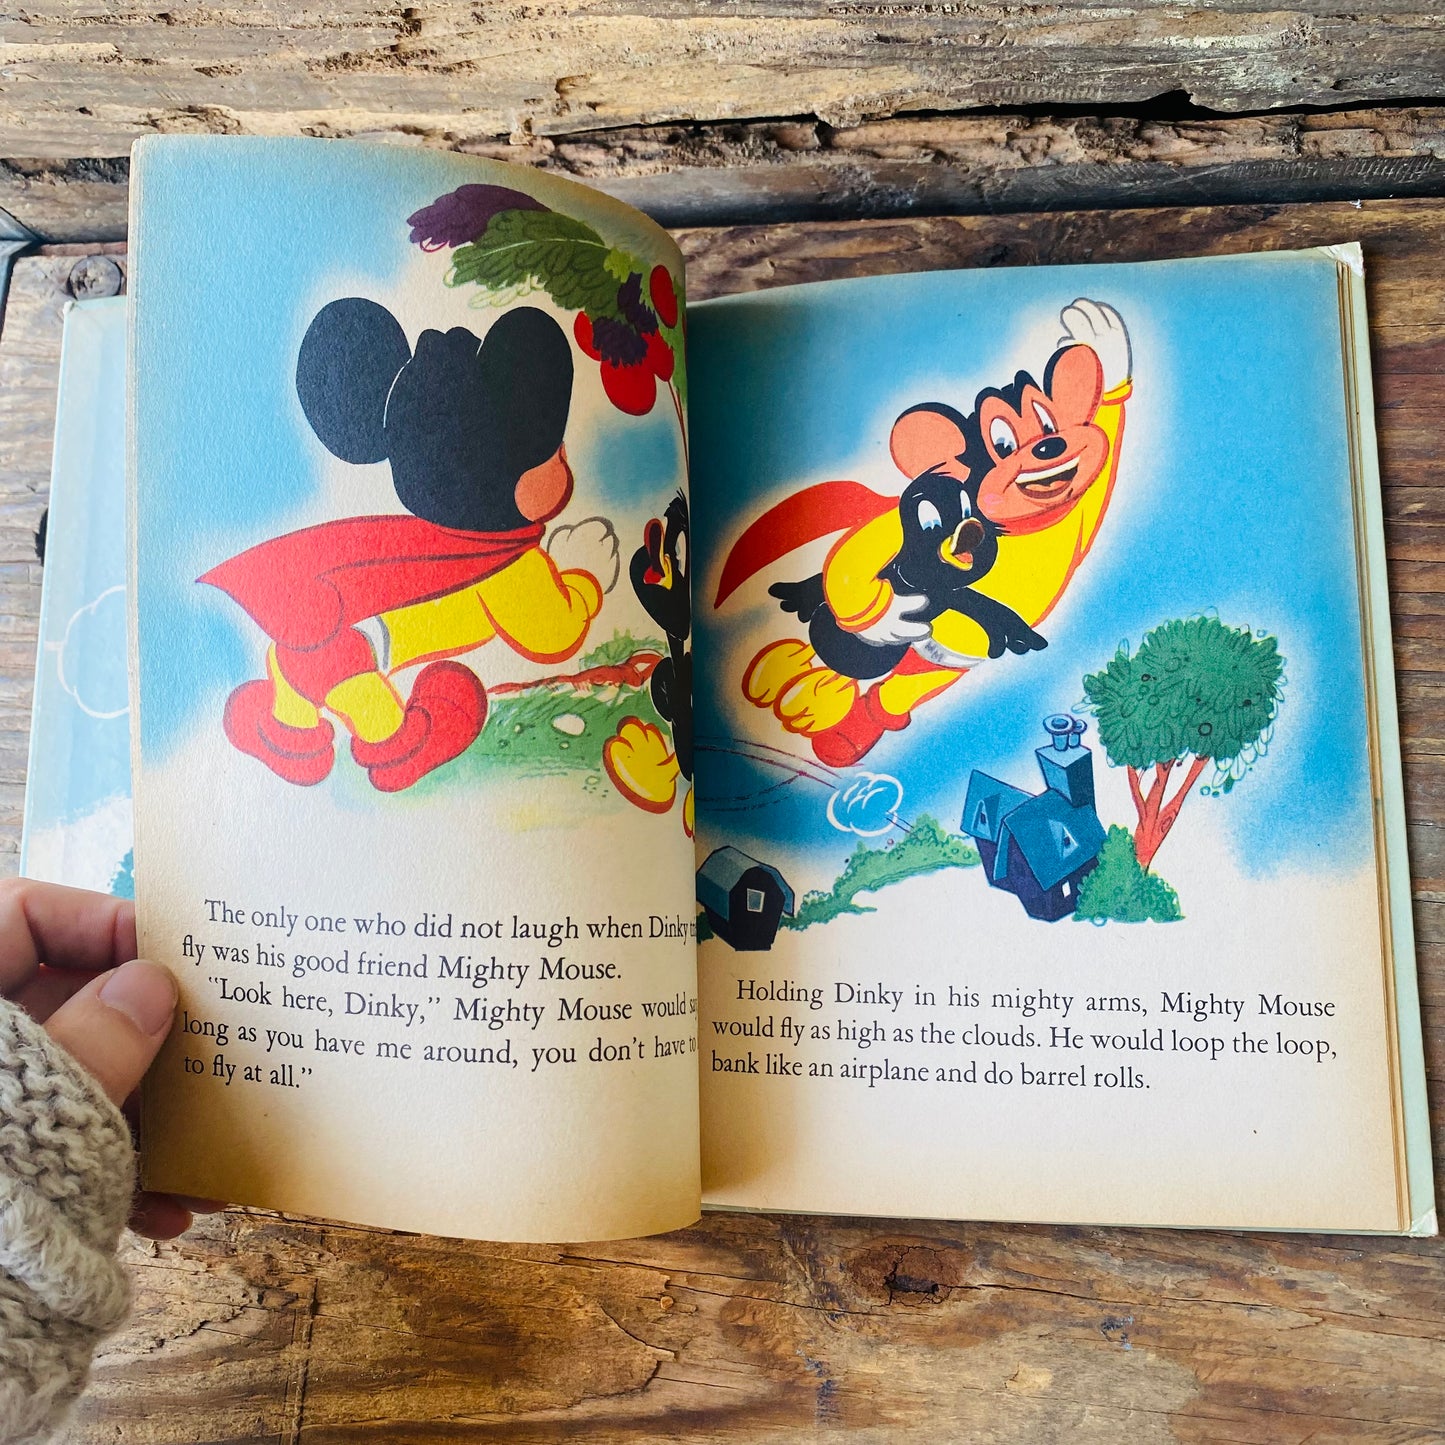 【1953 vintage】MIGHTY MOUSE picture book